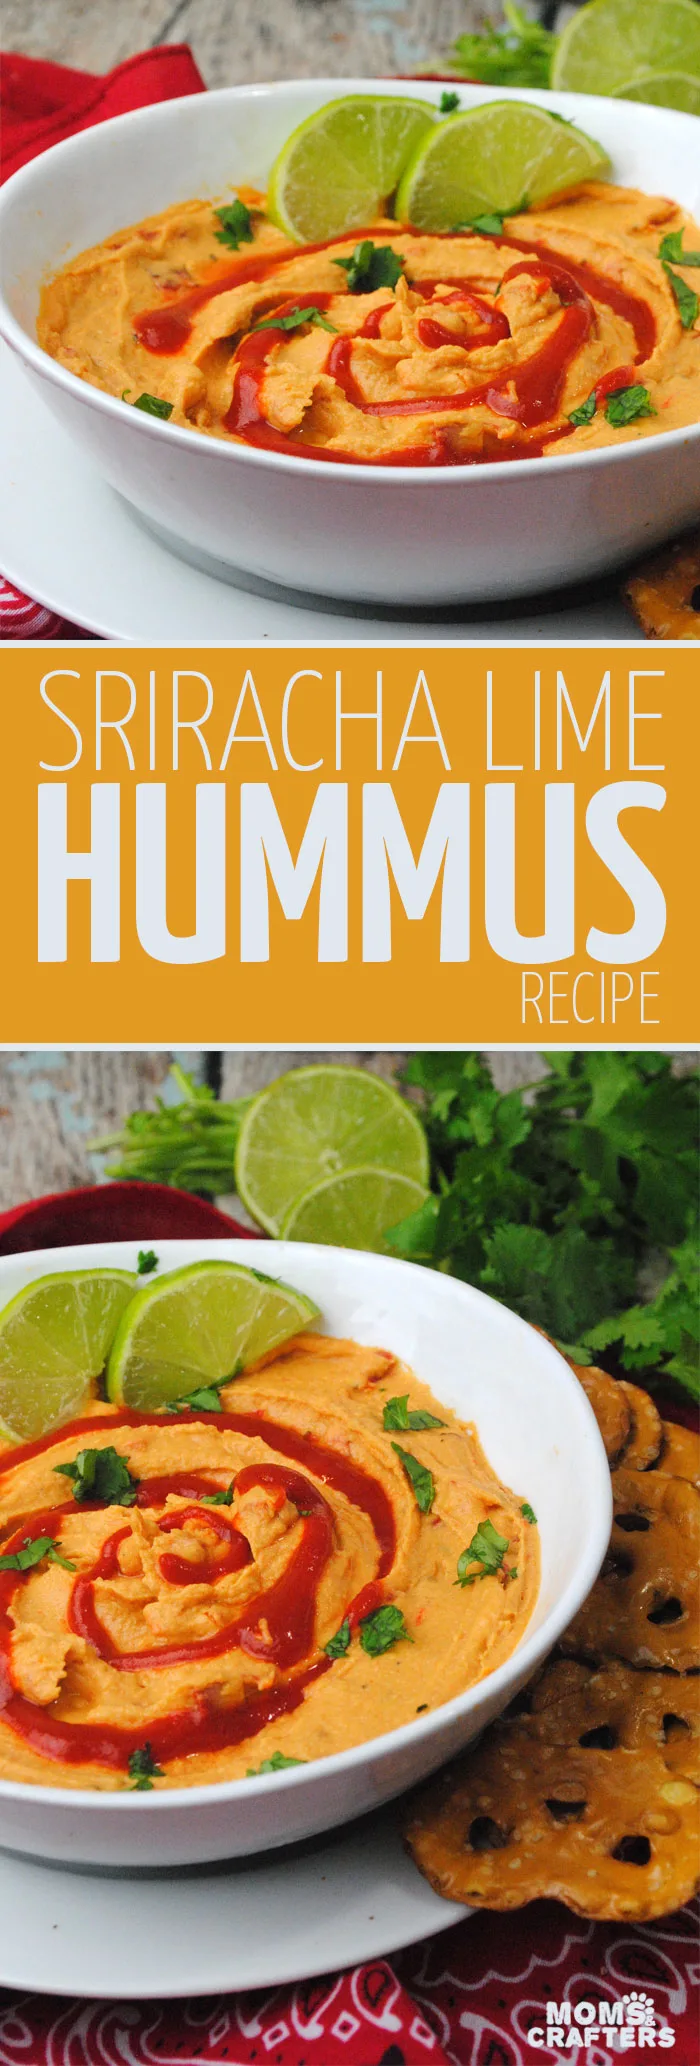 Make this delicious sriracha lime hummus recipe - a dip recipe with a kick! It's totally kid friendly and beautiful to display.